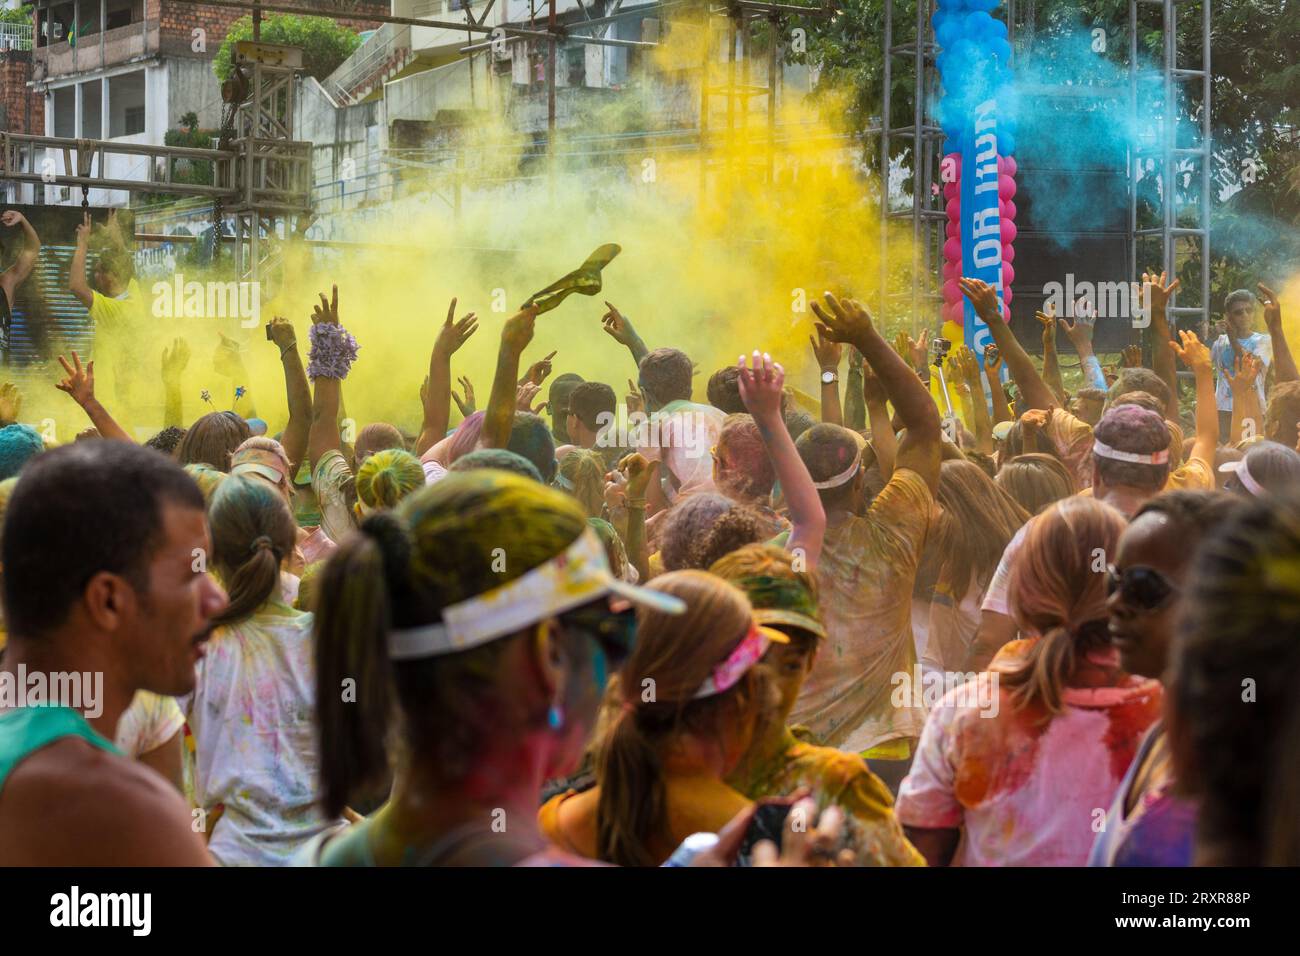 Salvador, Bahia, Brazil - March 22, 2015: Crowds of people are seen with their arms raised during the color run at Dique do Tororo in the city of Salv Stock Photo